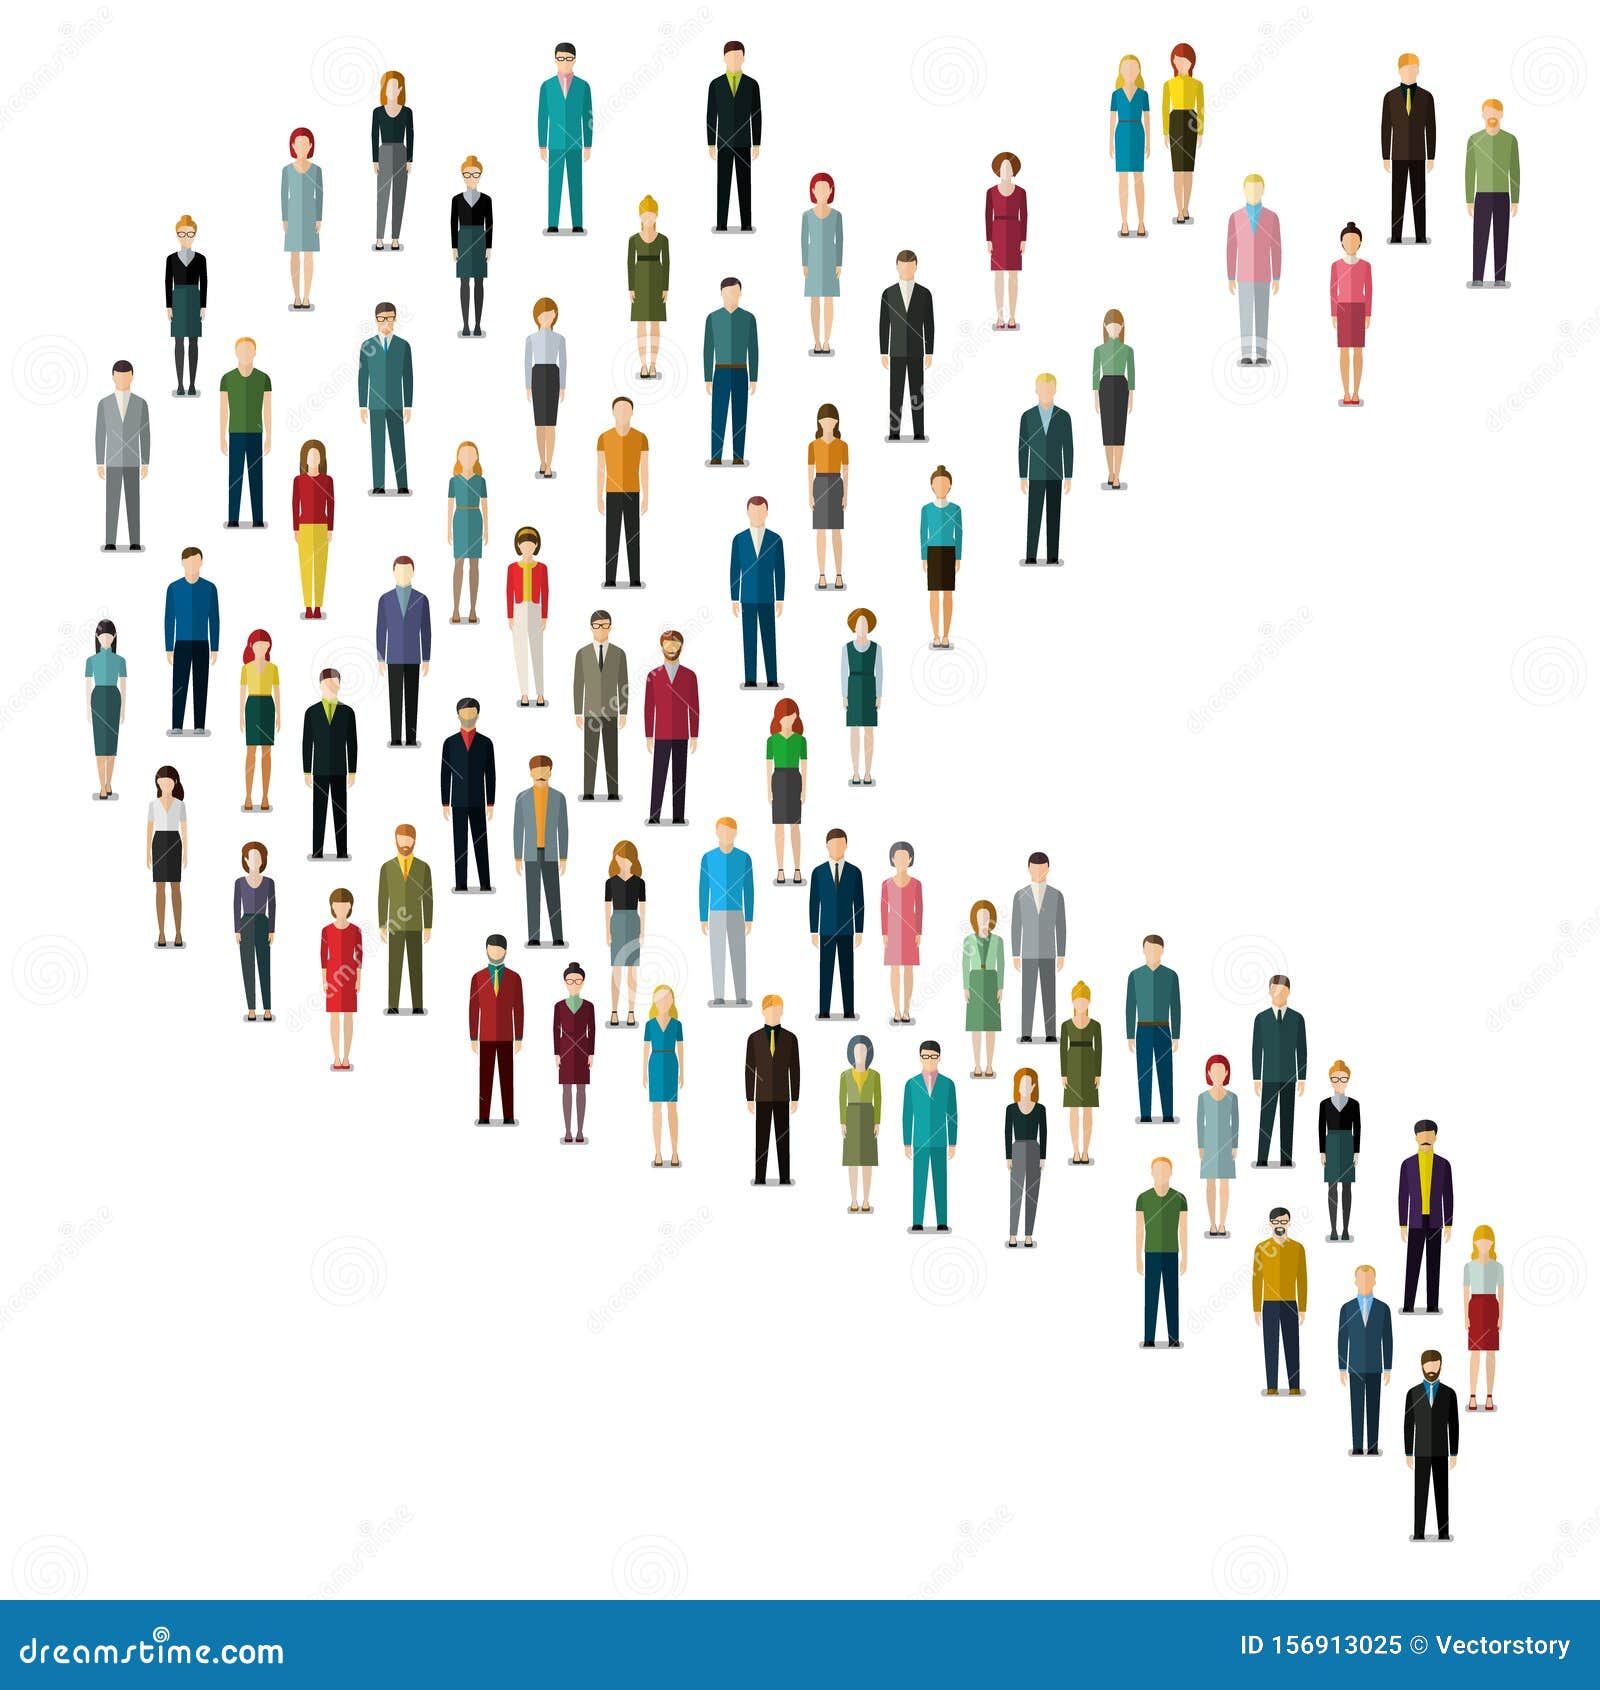 The Crowd Of Abstract Stock Vector Illustration Of, 60% OFF